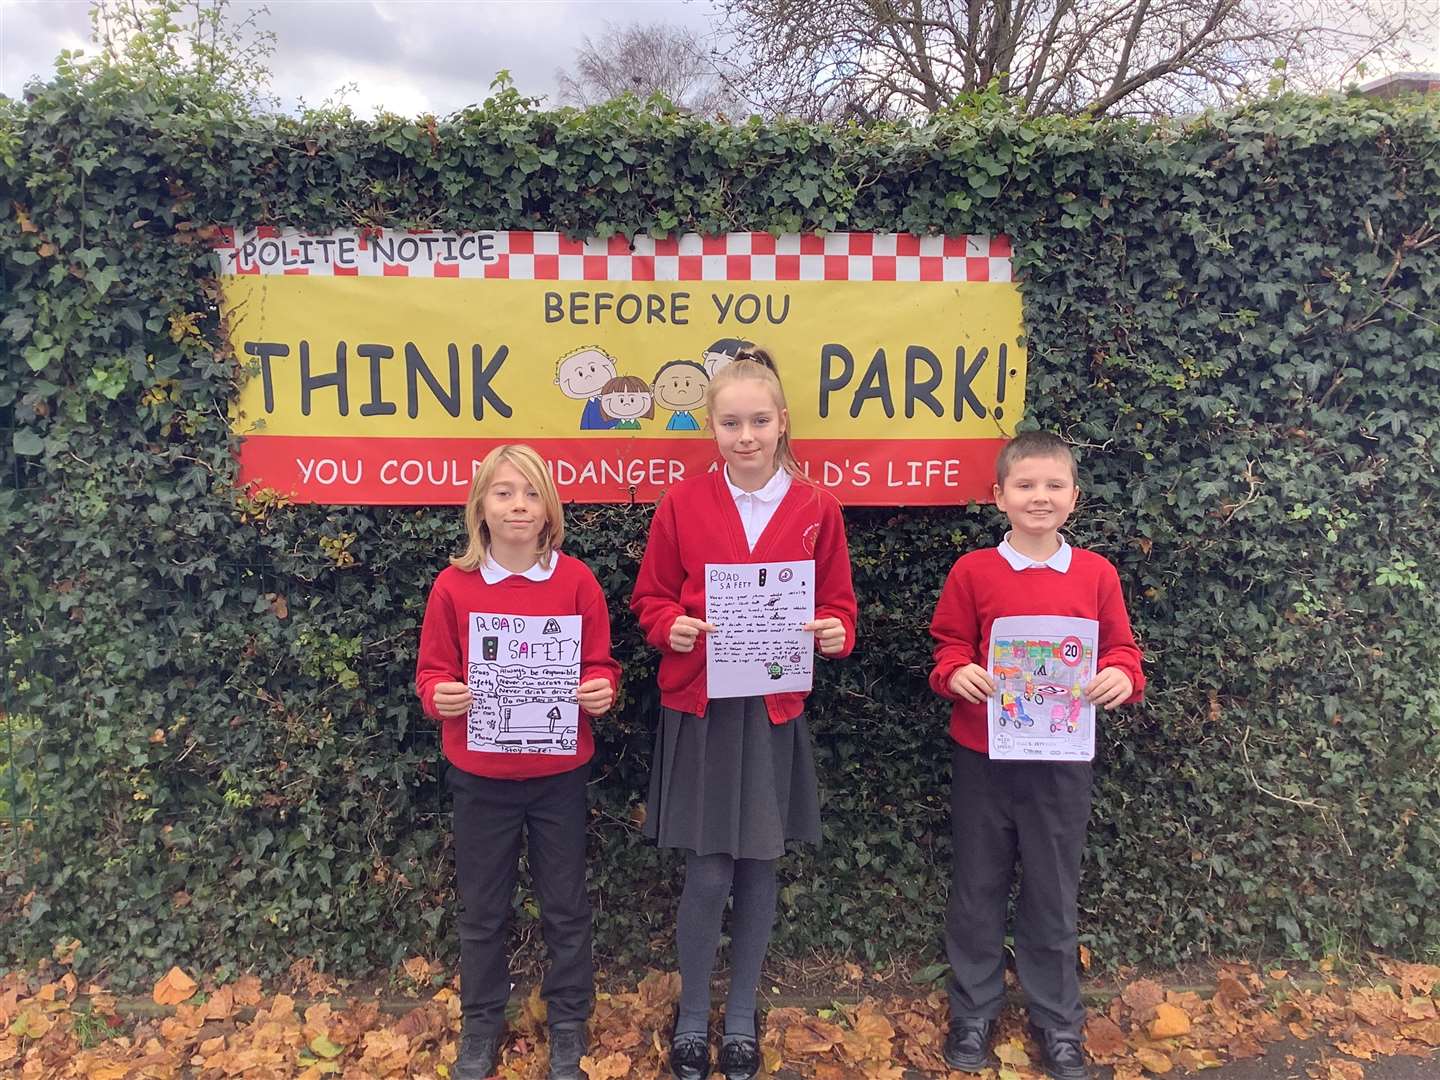 Painters Ash Primary School has launched a road safety campaign in response to a recent spate of near misses